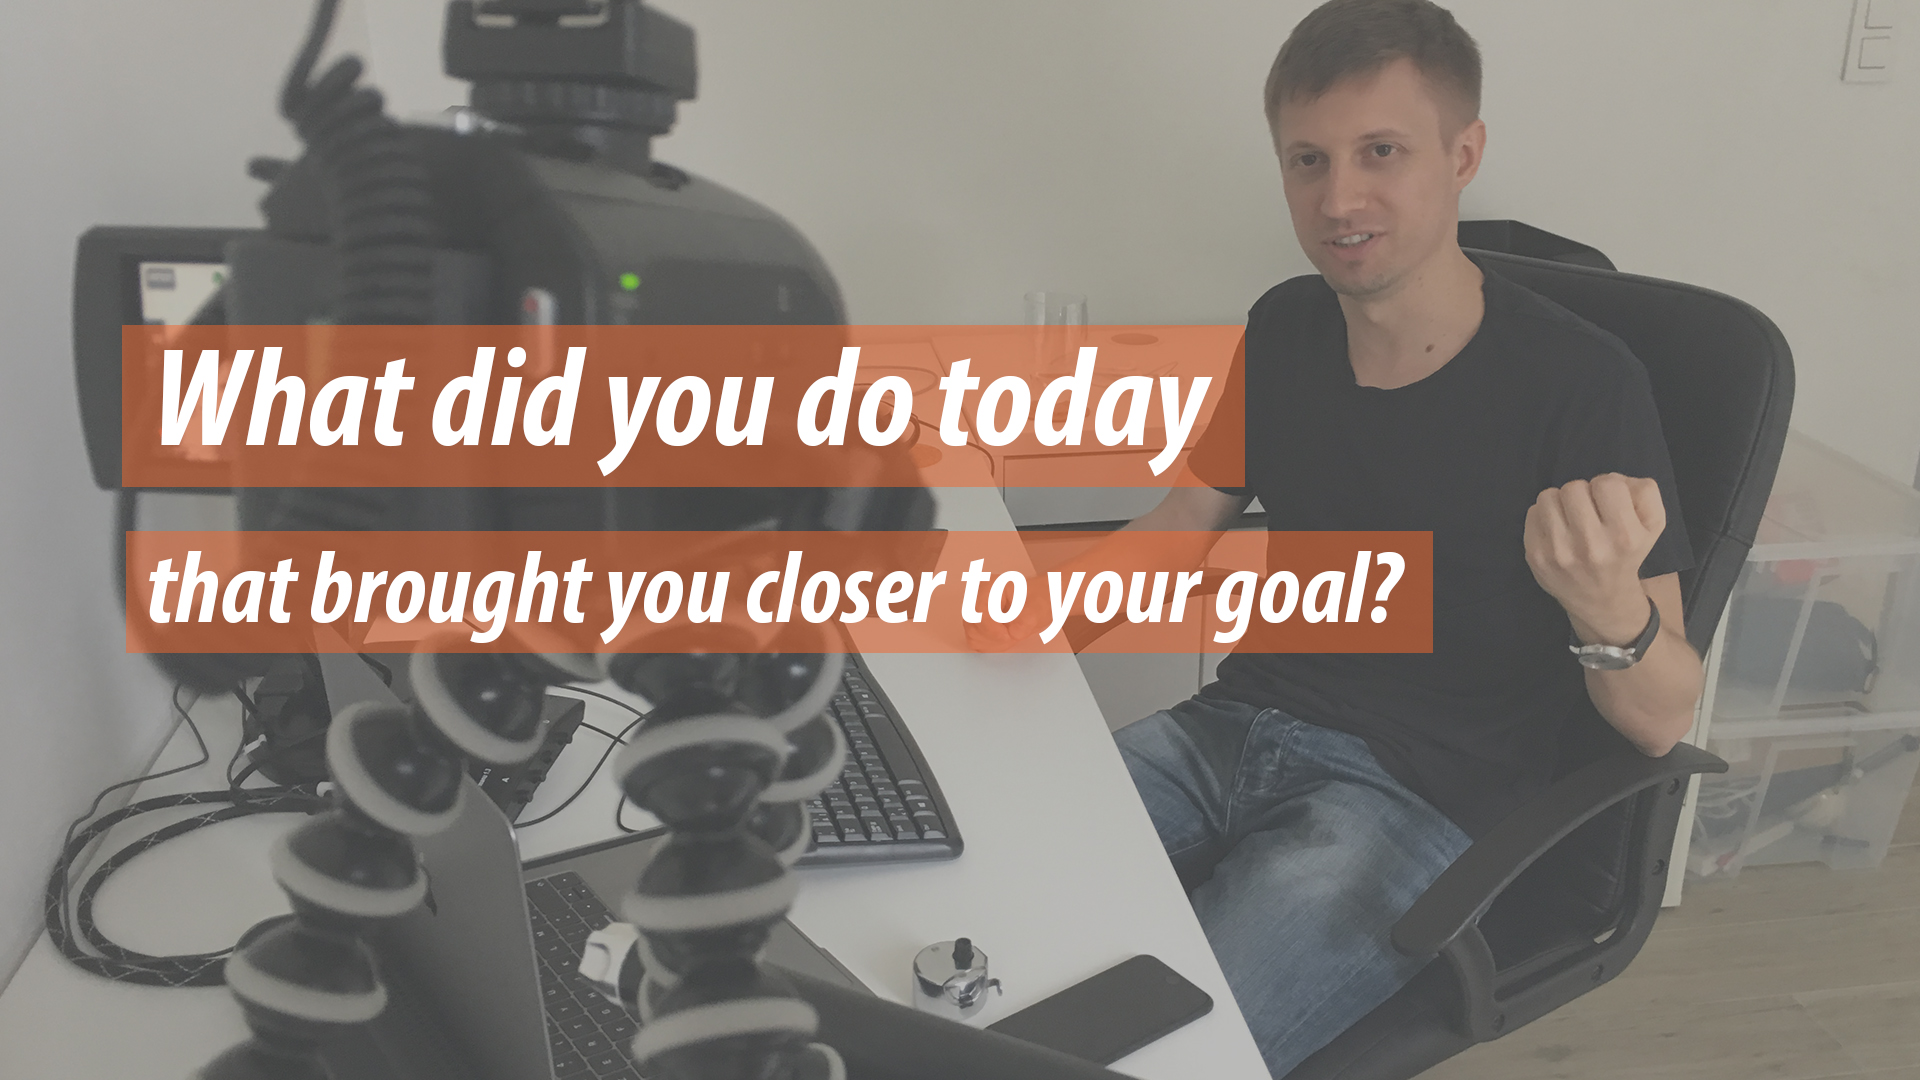 What did you do today that brought you closer to your goal?